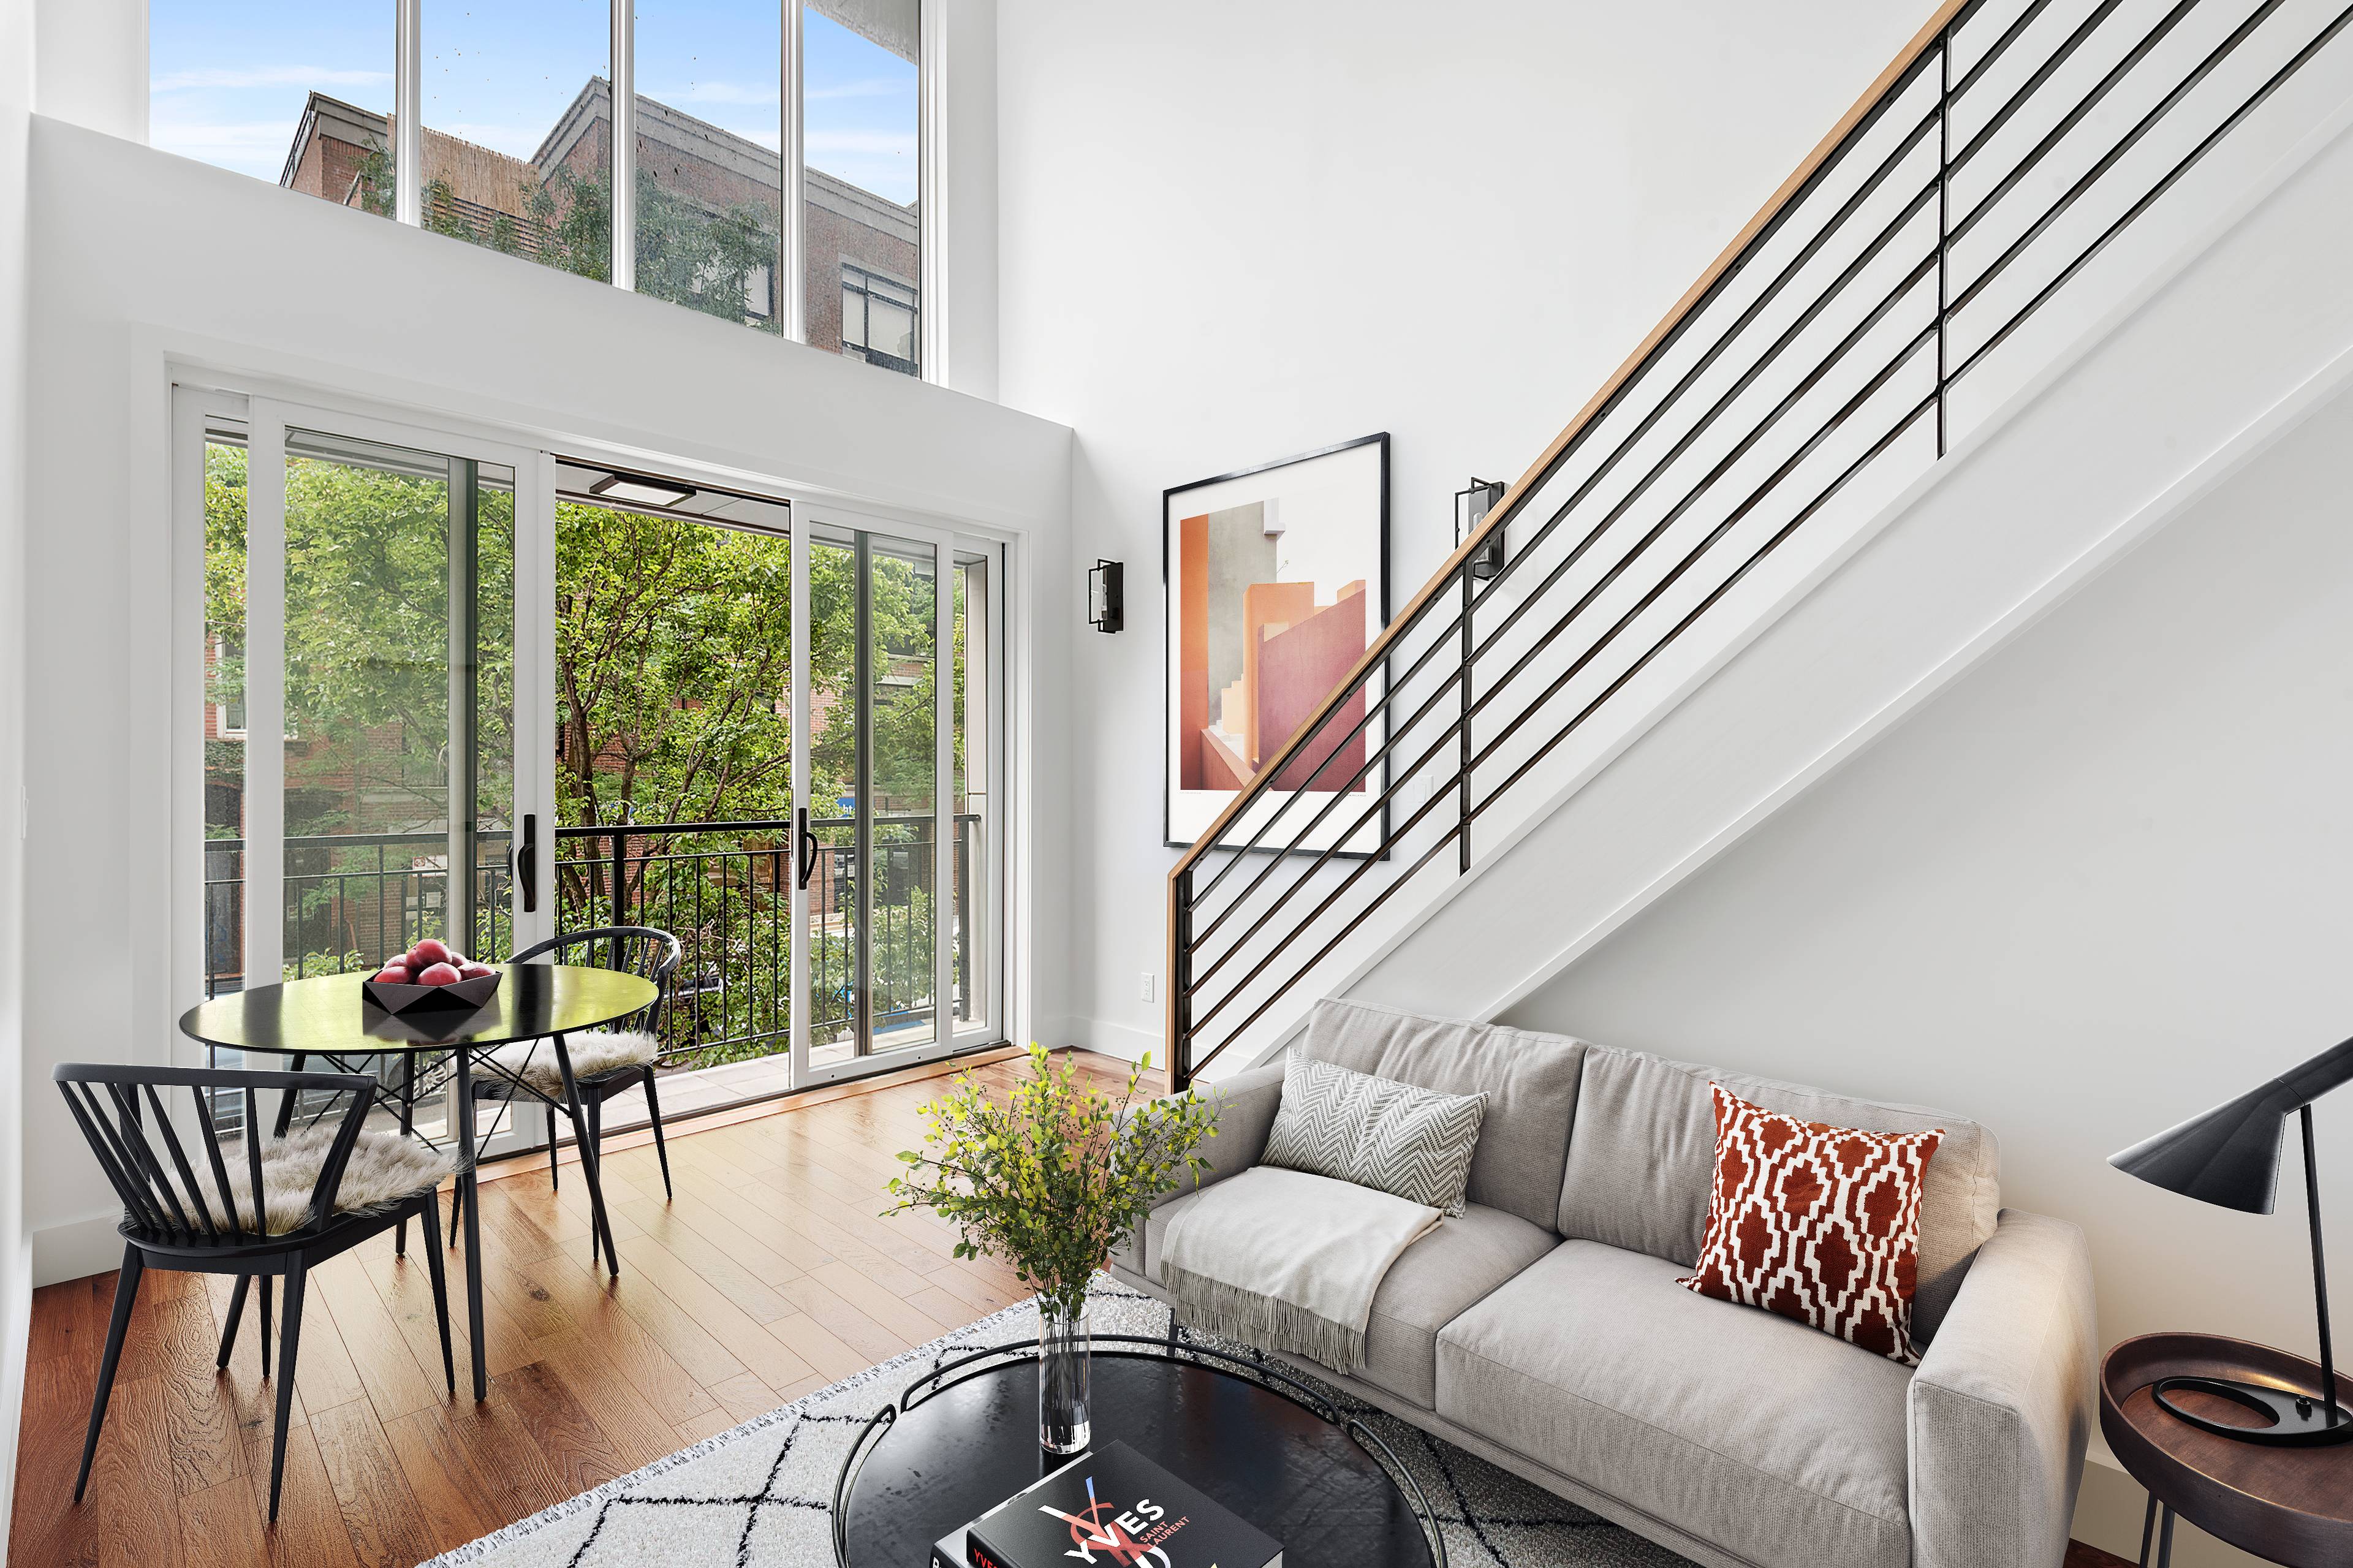 Set in a quiet leafy block of Williamsburg with easy access to Manhattan via the L train, 25 Hope Street is a newly constructed boutique rental building that embodies the ...